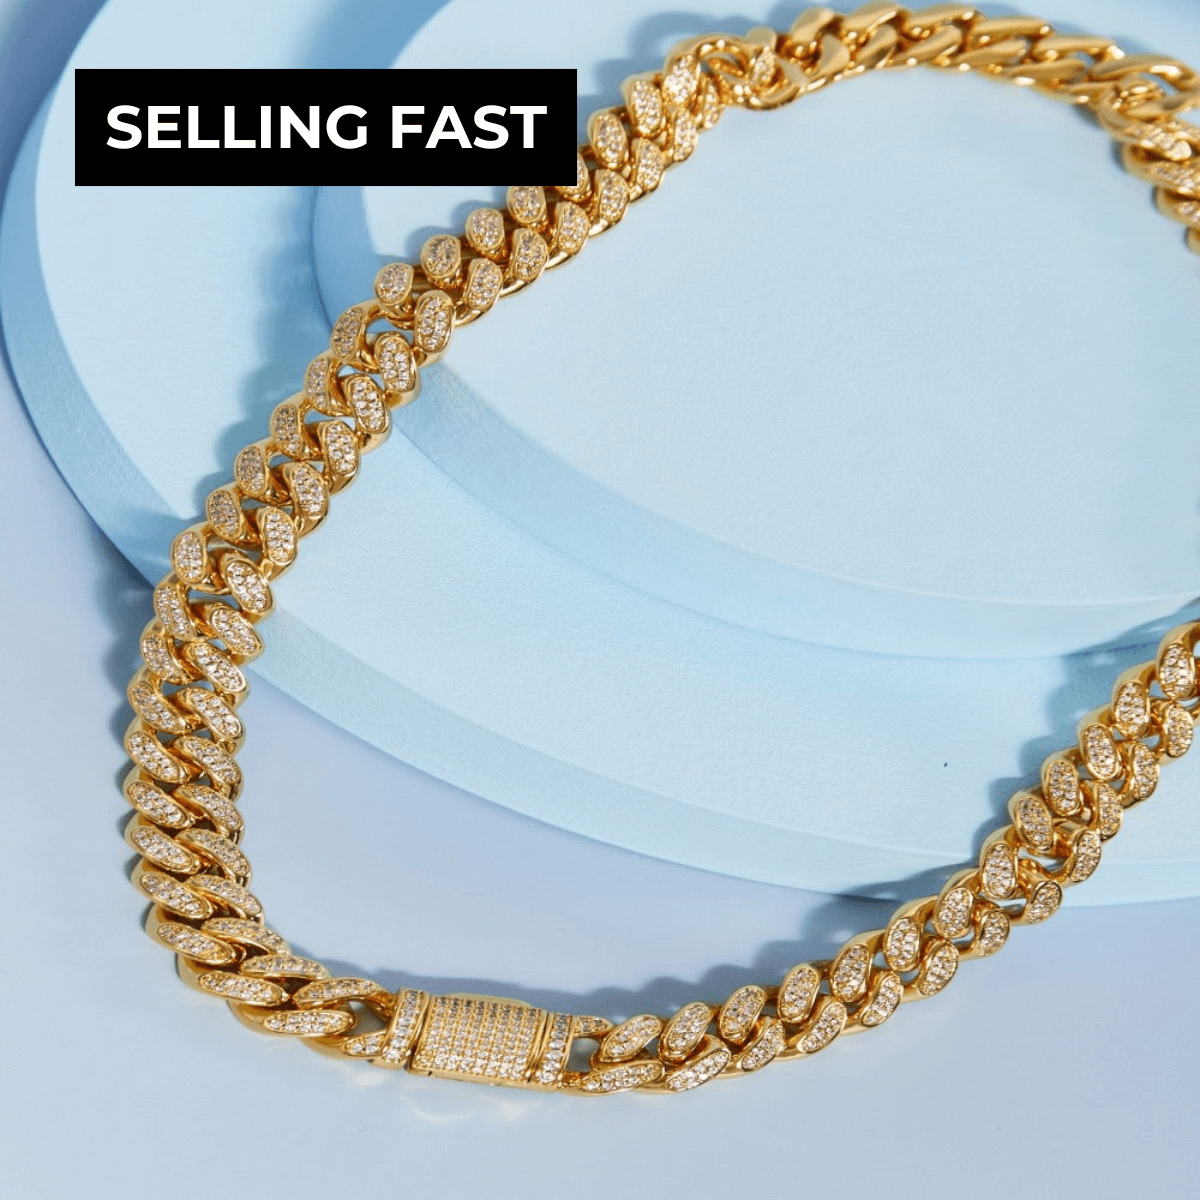 On My Mind - Gold Diamond Chunky Curb Chain Necklace